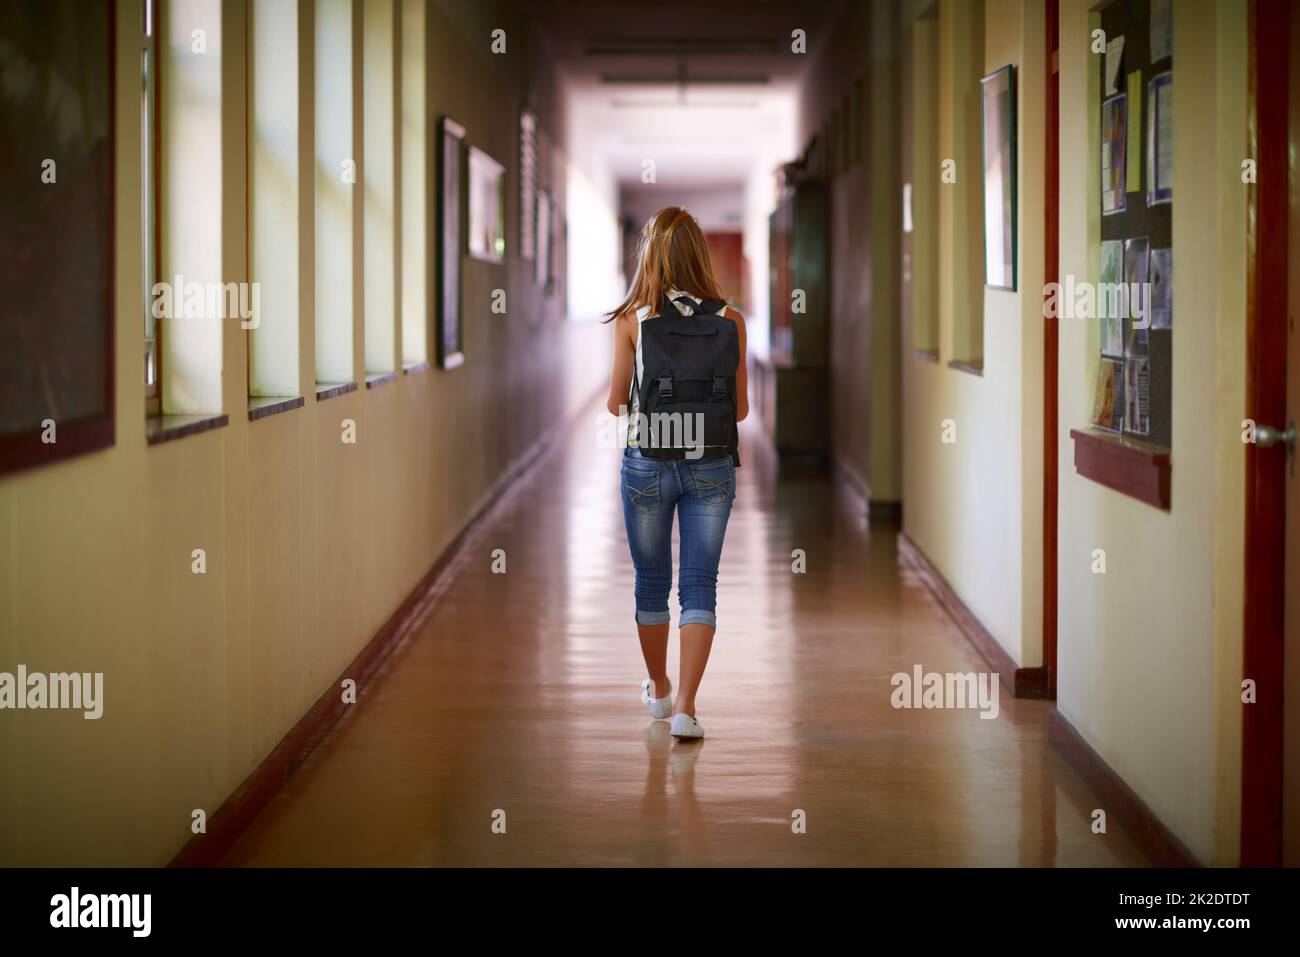 Time to go home. Shot of a young girl in her school hallway. Stock Photo